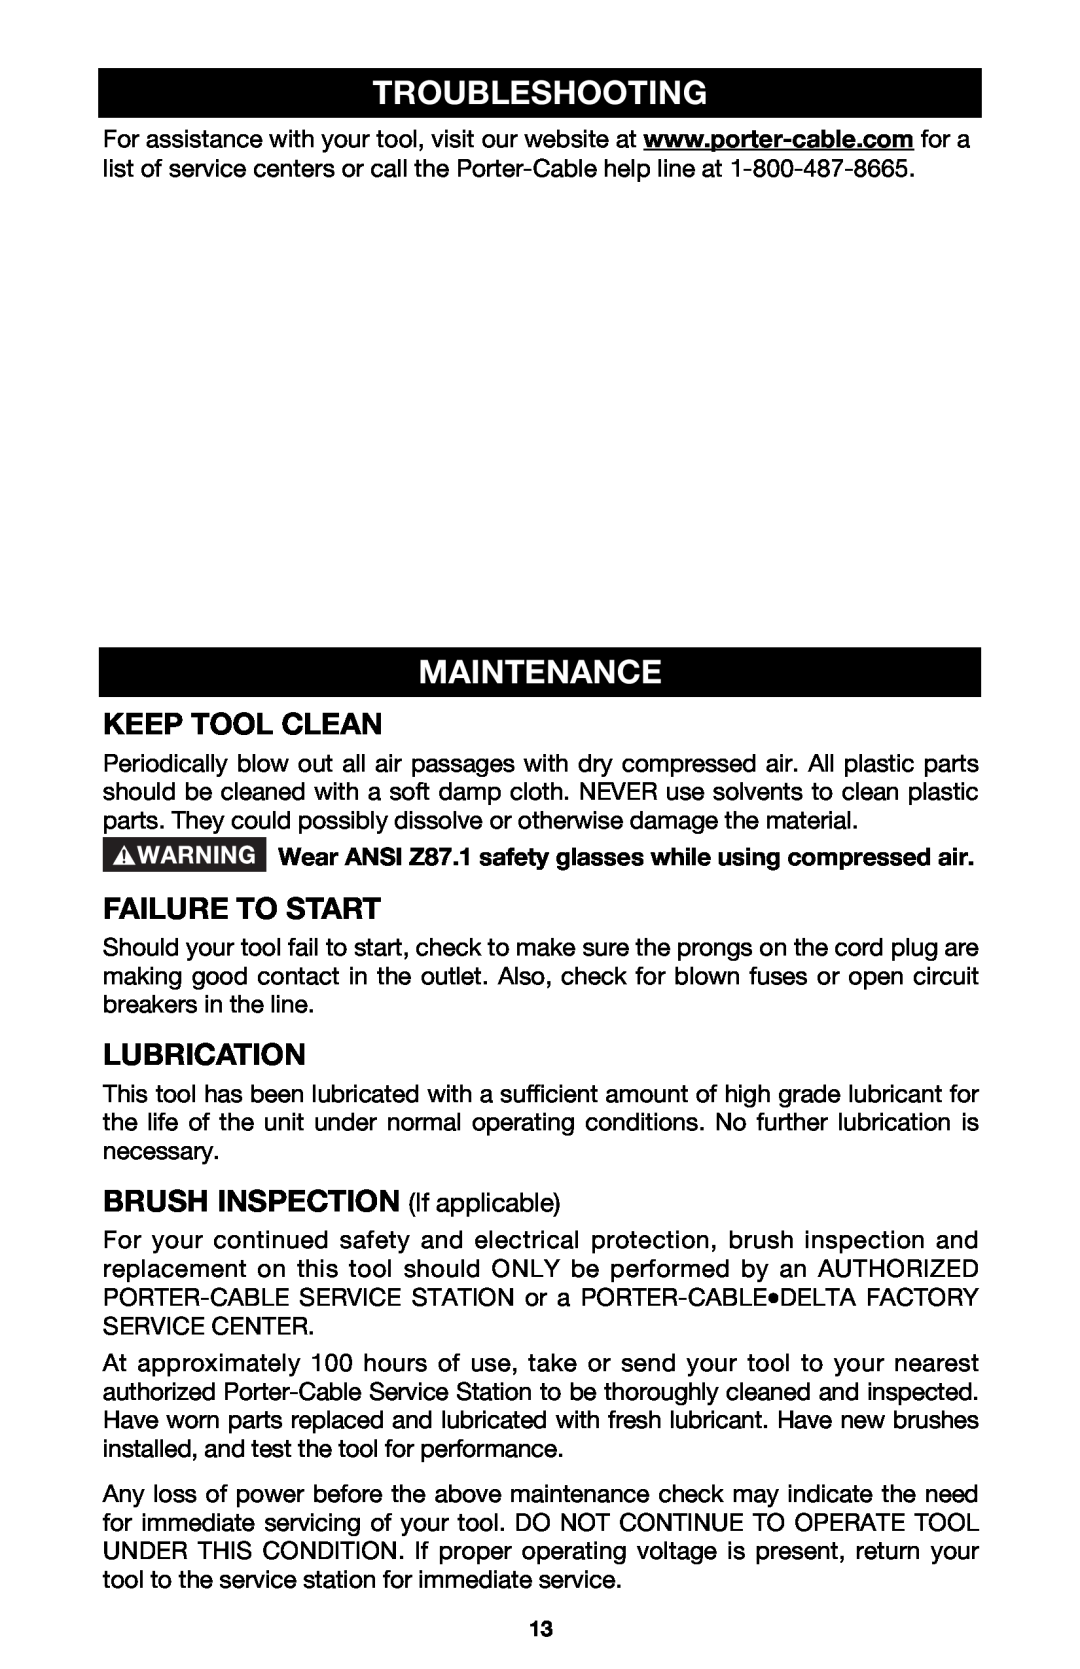 Porter-Cable 6603 instruction manual Troubleshooting, Maintenance, Keep Tool Clean, Failure To Start, Lubrication 